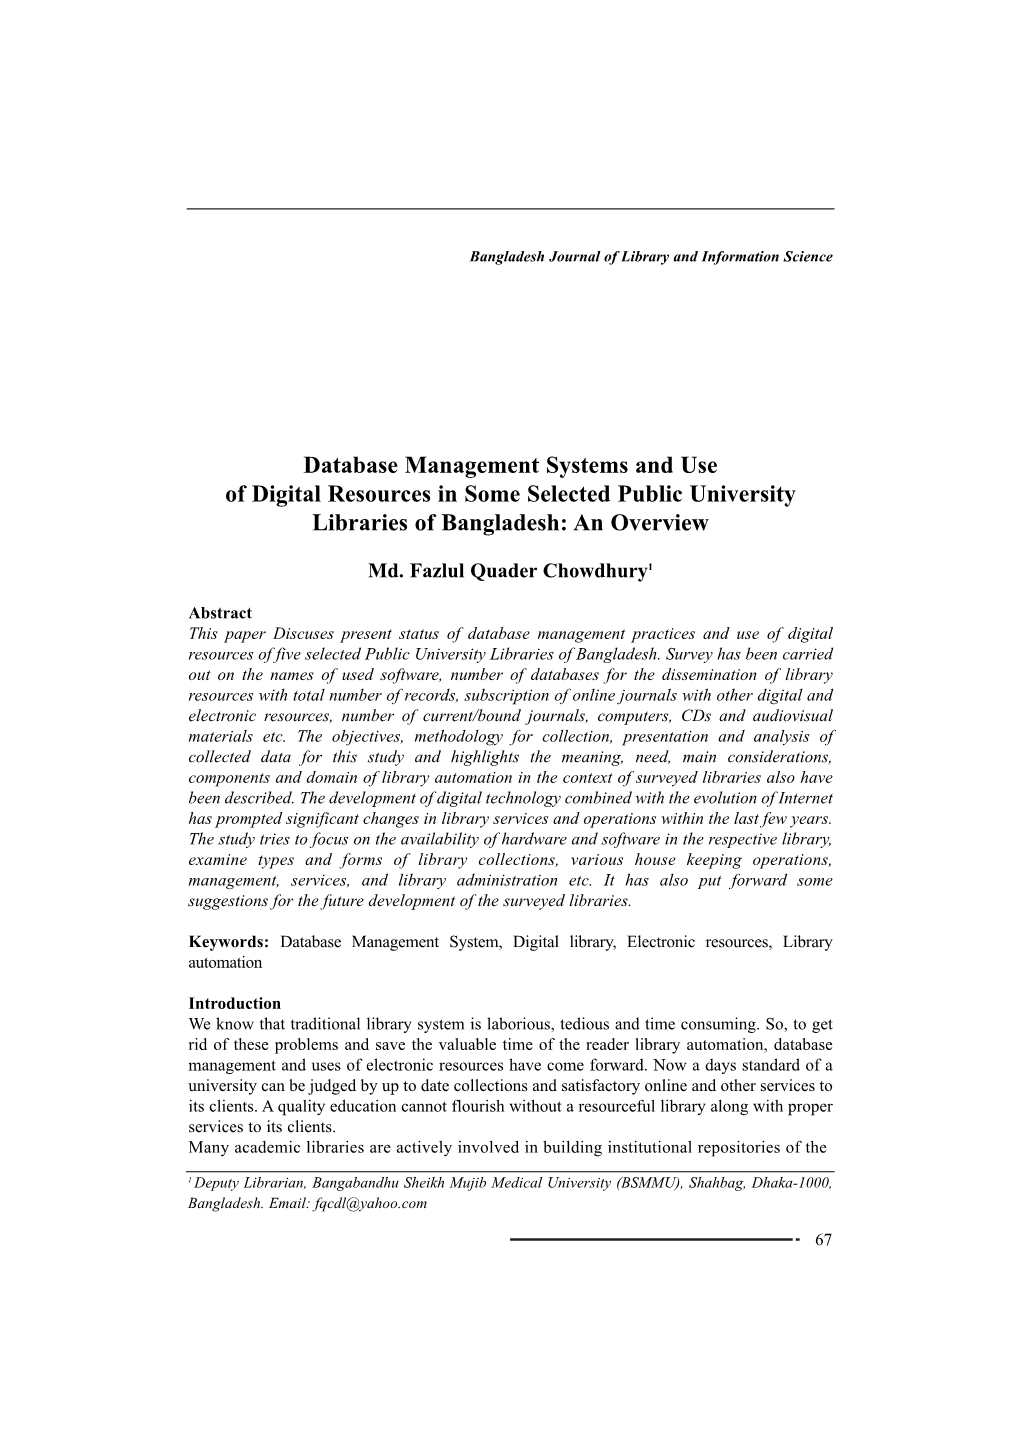 Database Management Systems and Use of Digital Resources in Some Selected Public University Libraries of Bangladesh: an Overview